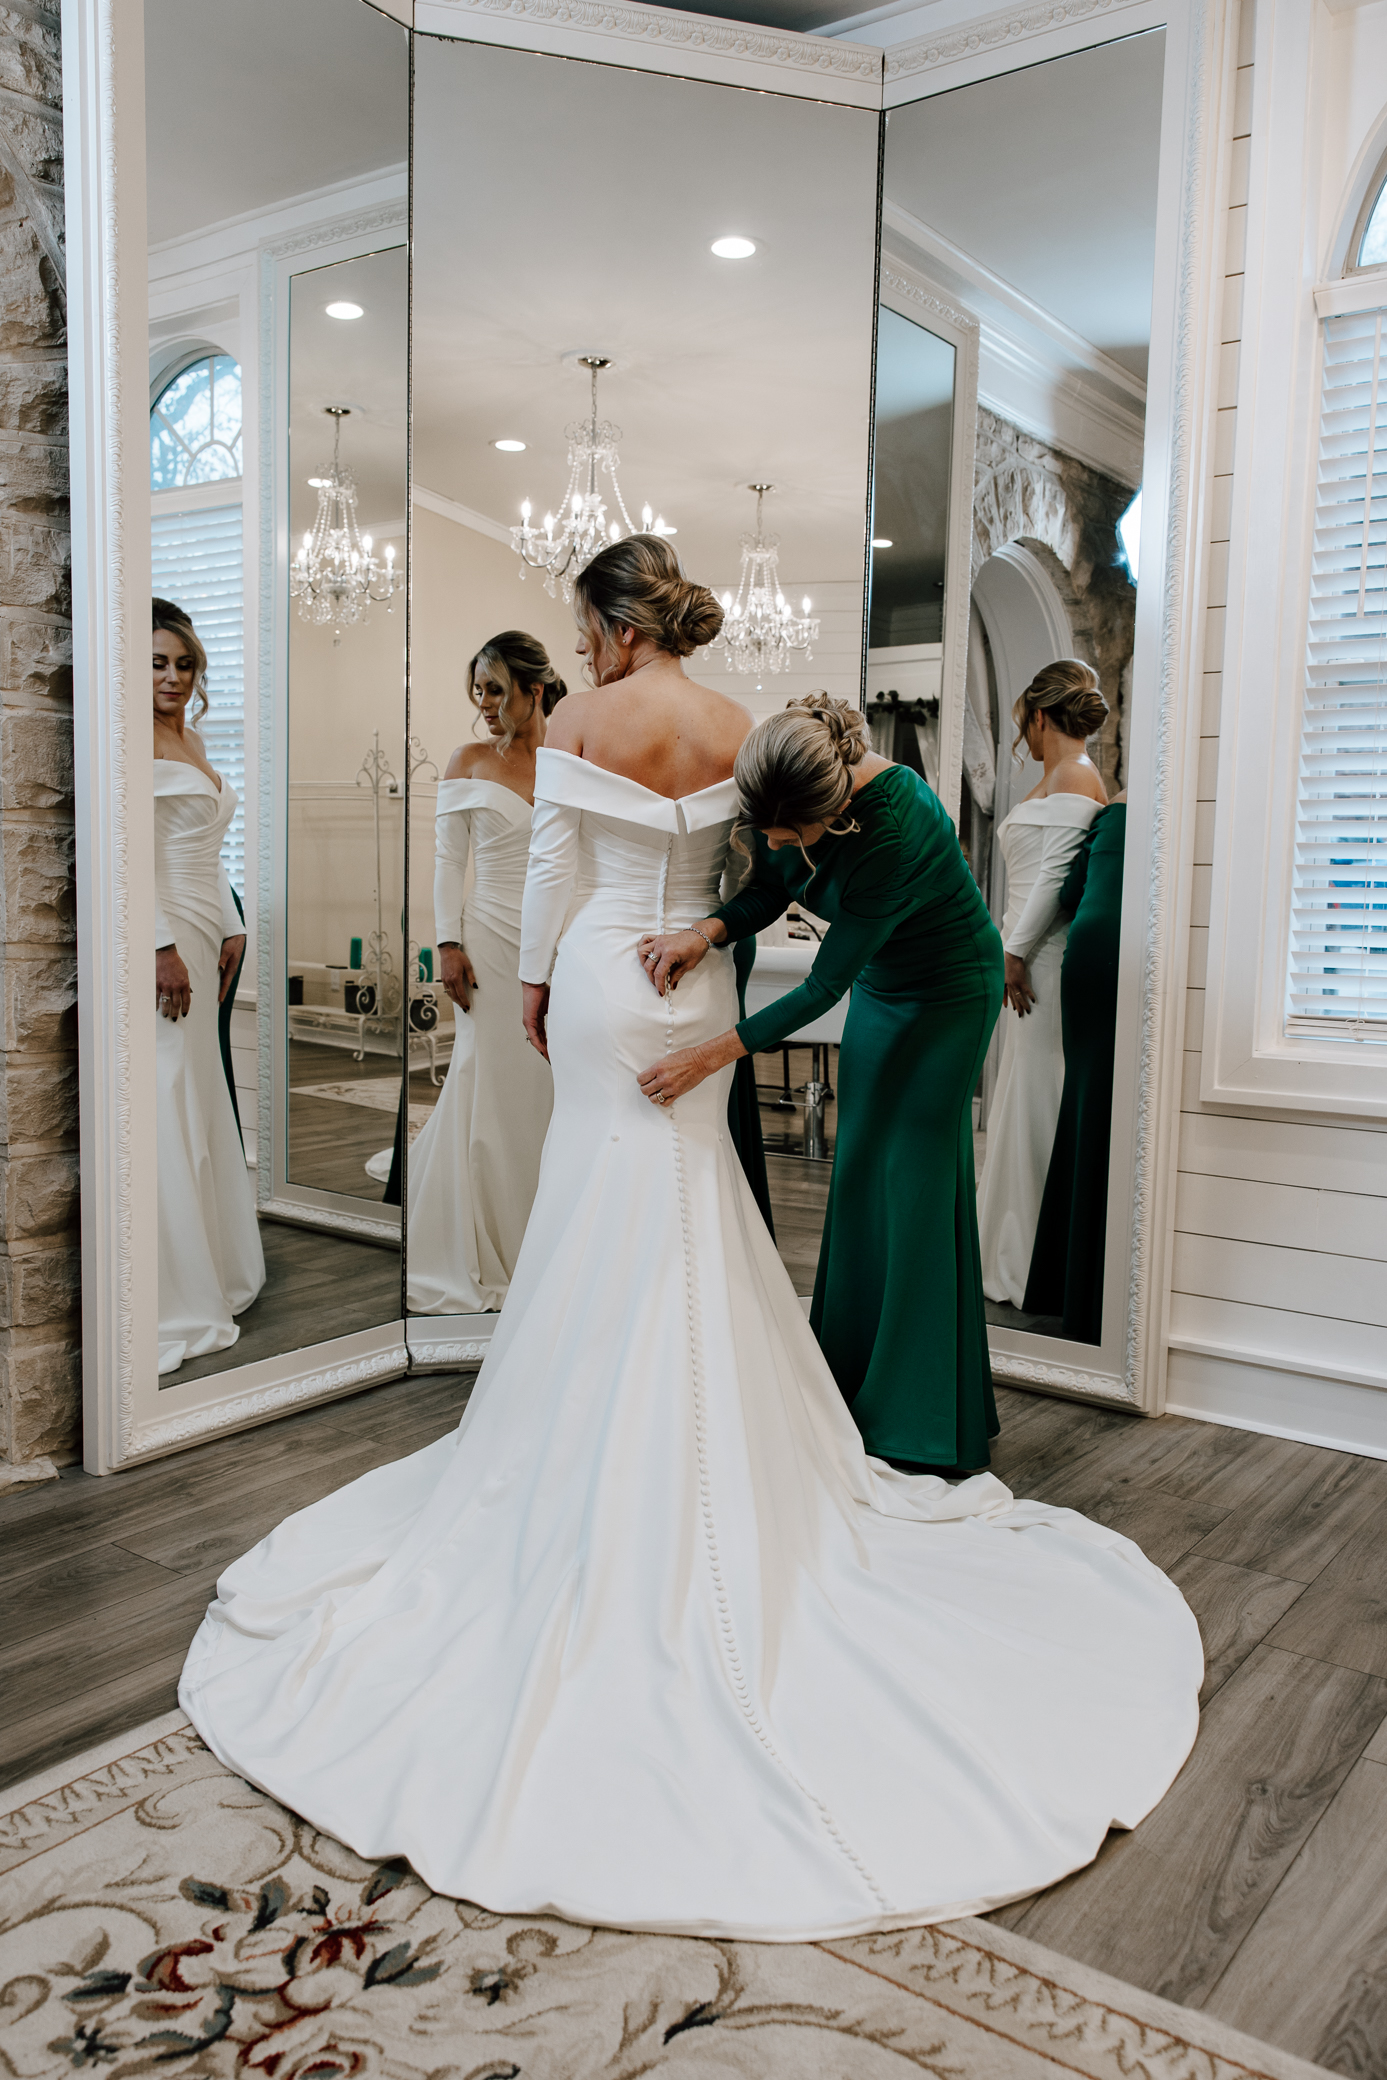 A bride gets buttoned into her white minimalist wedding gown by her mother who is wearing a green velvet gown.